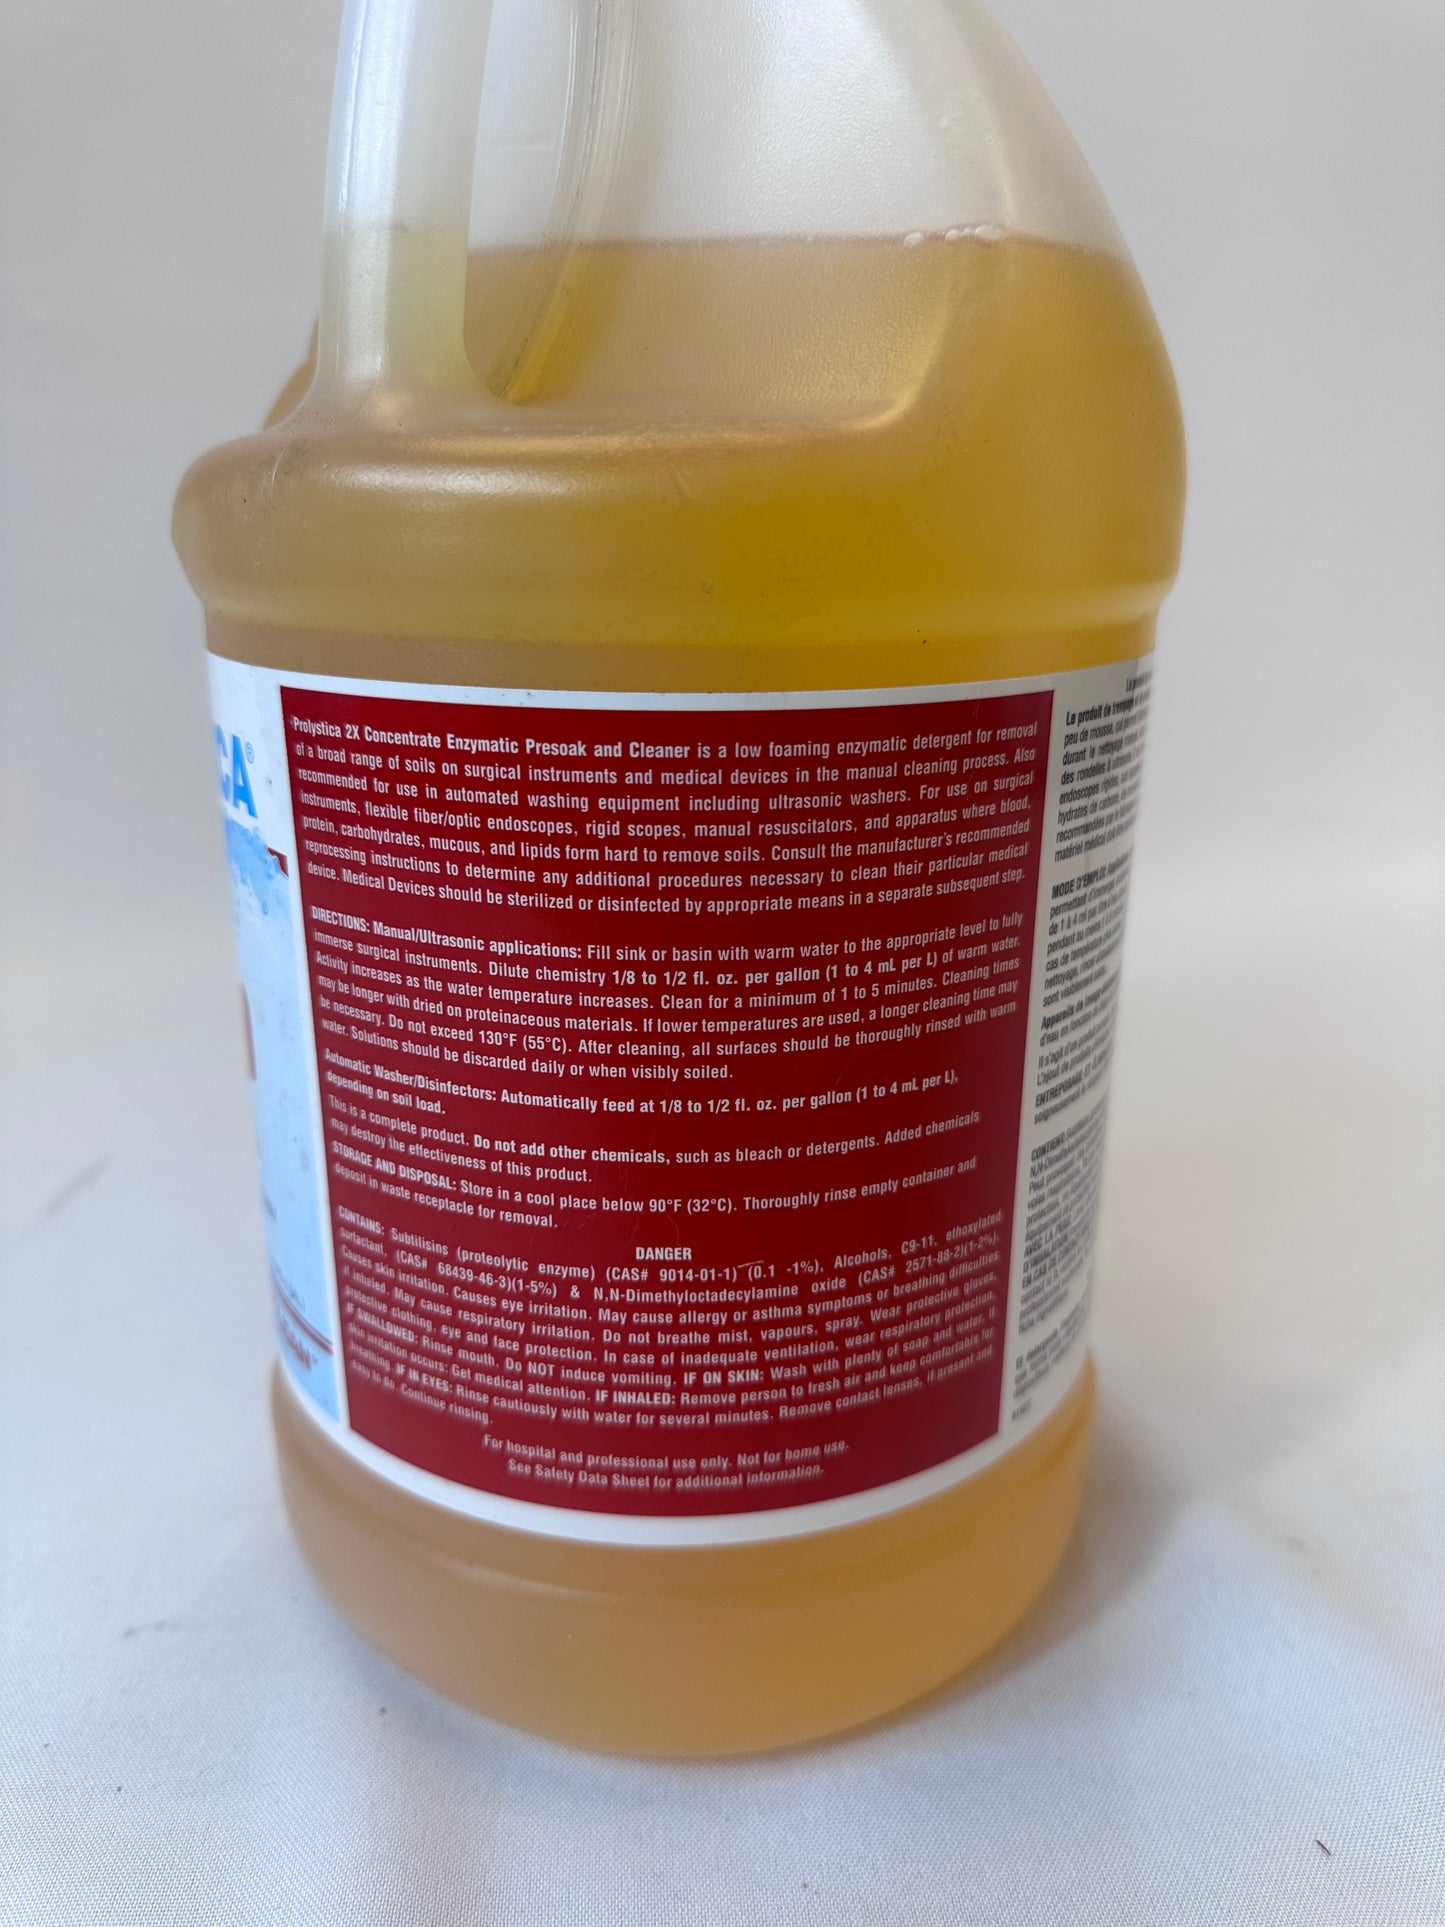 Prolystica Enzymatic Concentrate Cleaner - 1 Gal.